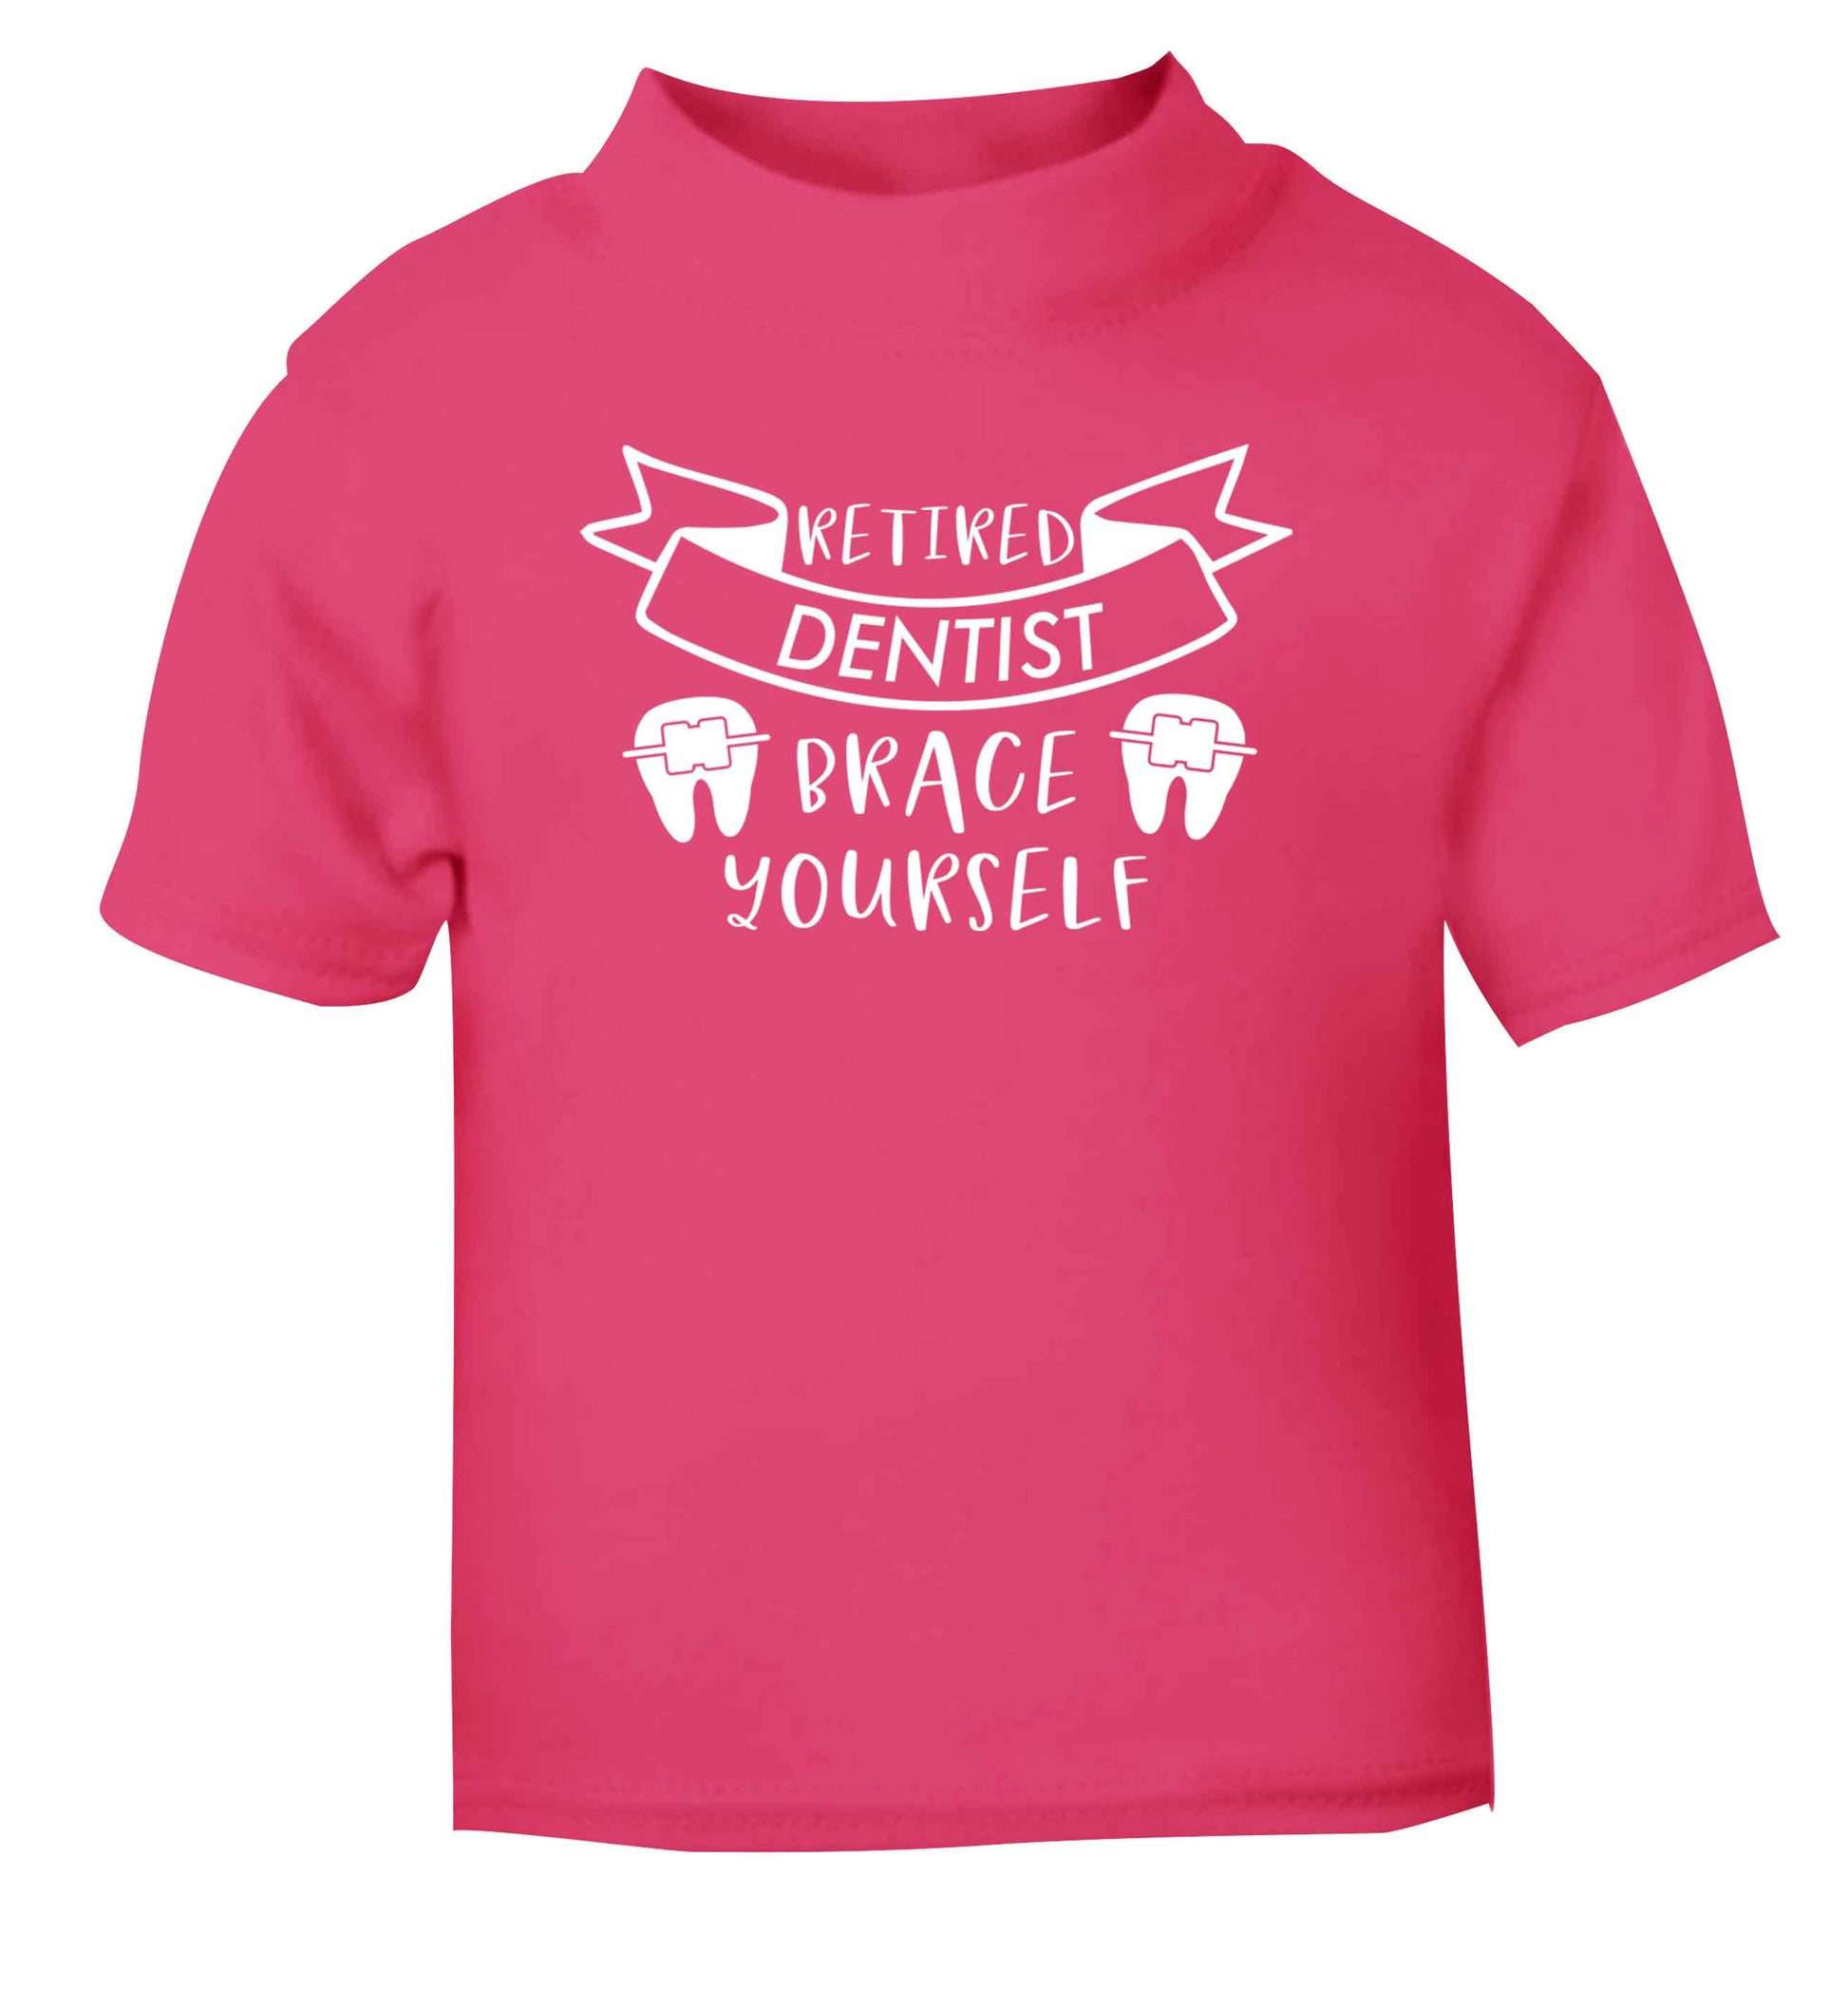 Retired dentist brace yourself pink Baby Toddler Tshirt 2 Years